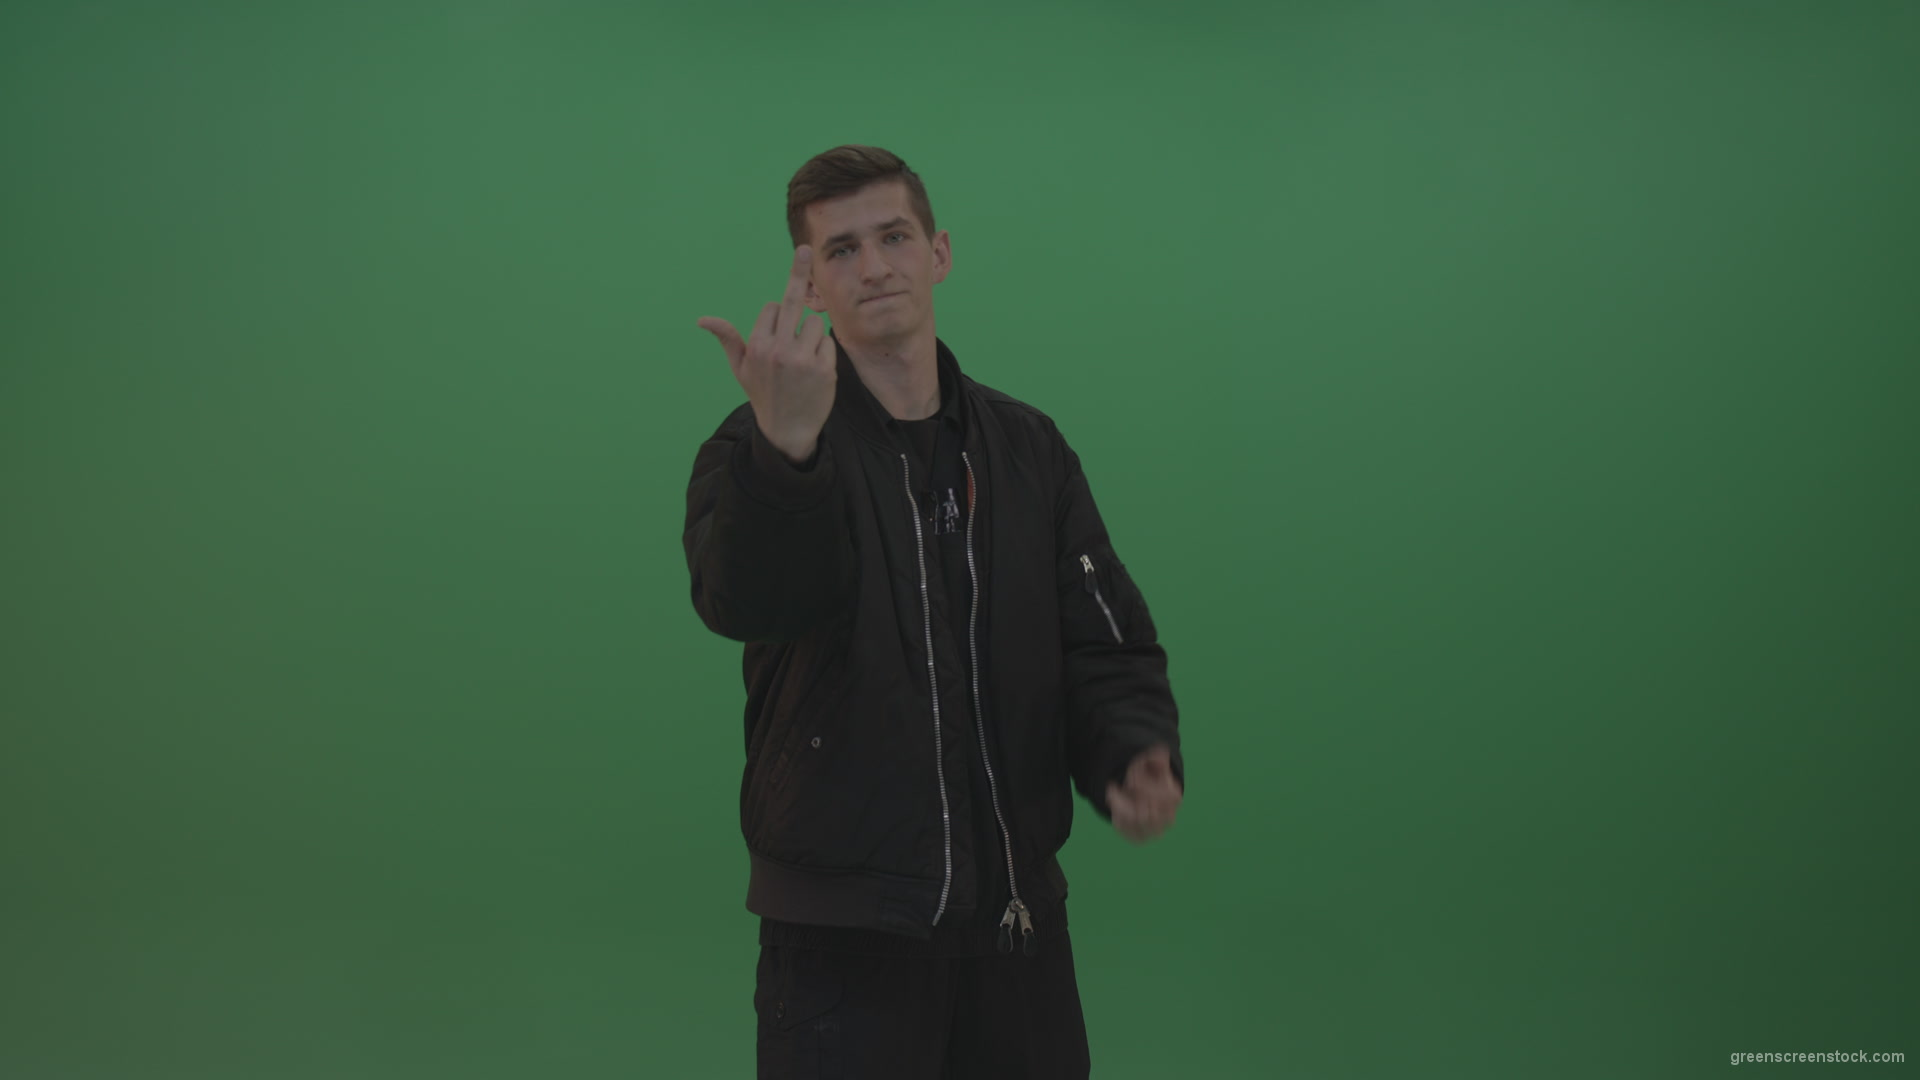 Boy-in-black-wear-displays-the-kill-sign-and-two-middle-fingers-in-the-air-over-chromakey-background_005 Green Screen Stock